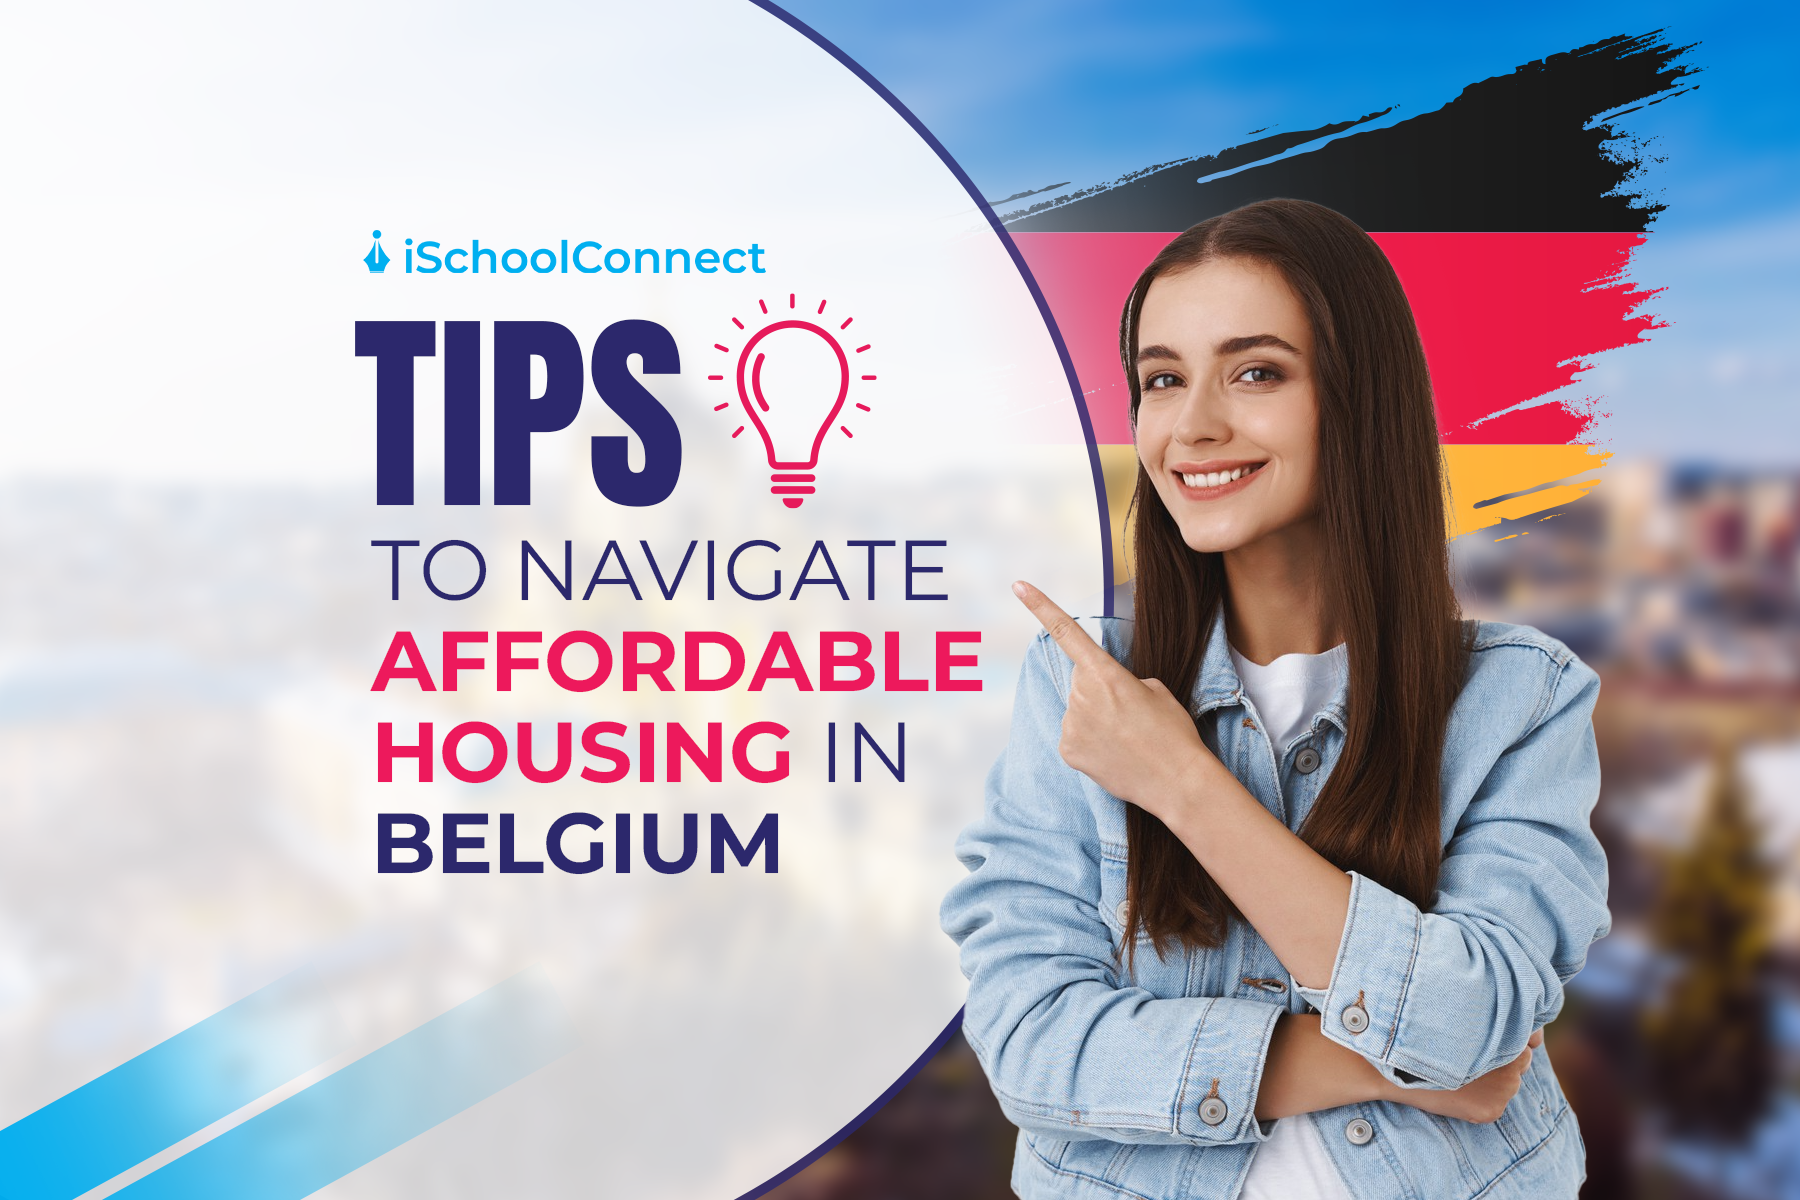 Finding affordable accommodation in Belgium | Tips and tricks